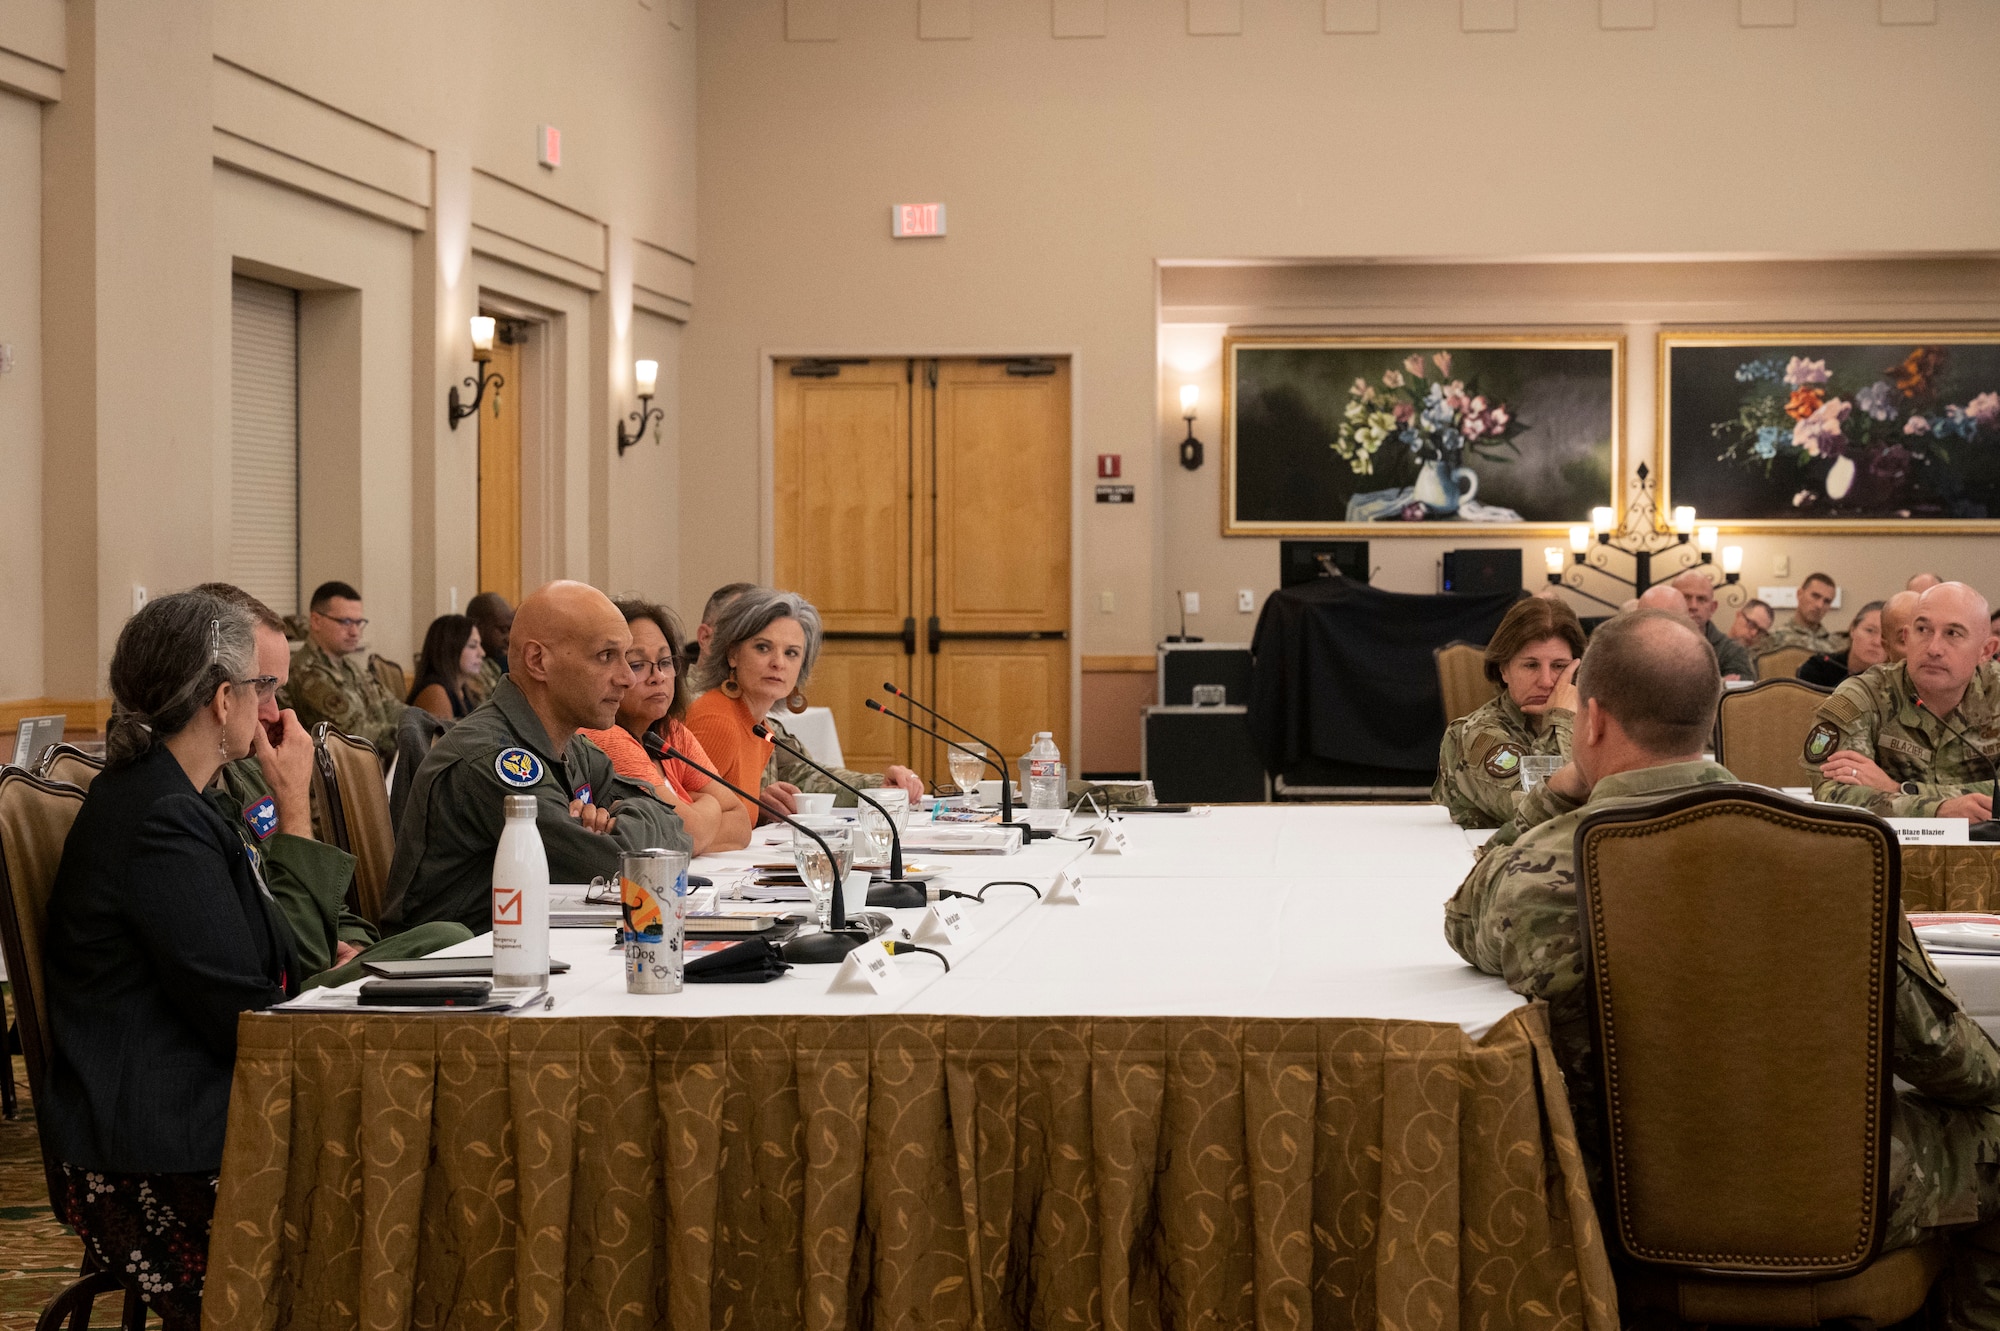 U.S. Air Force Lt. Gen. Brian Robinson, commander of Air Education and Training Command, speaks with commanders, command chiefs and spouses from across the command during AETC's Gathering of the Torch at Joint Base San Antonio-Lackland, Texas, Nov. 9, 2022